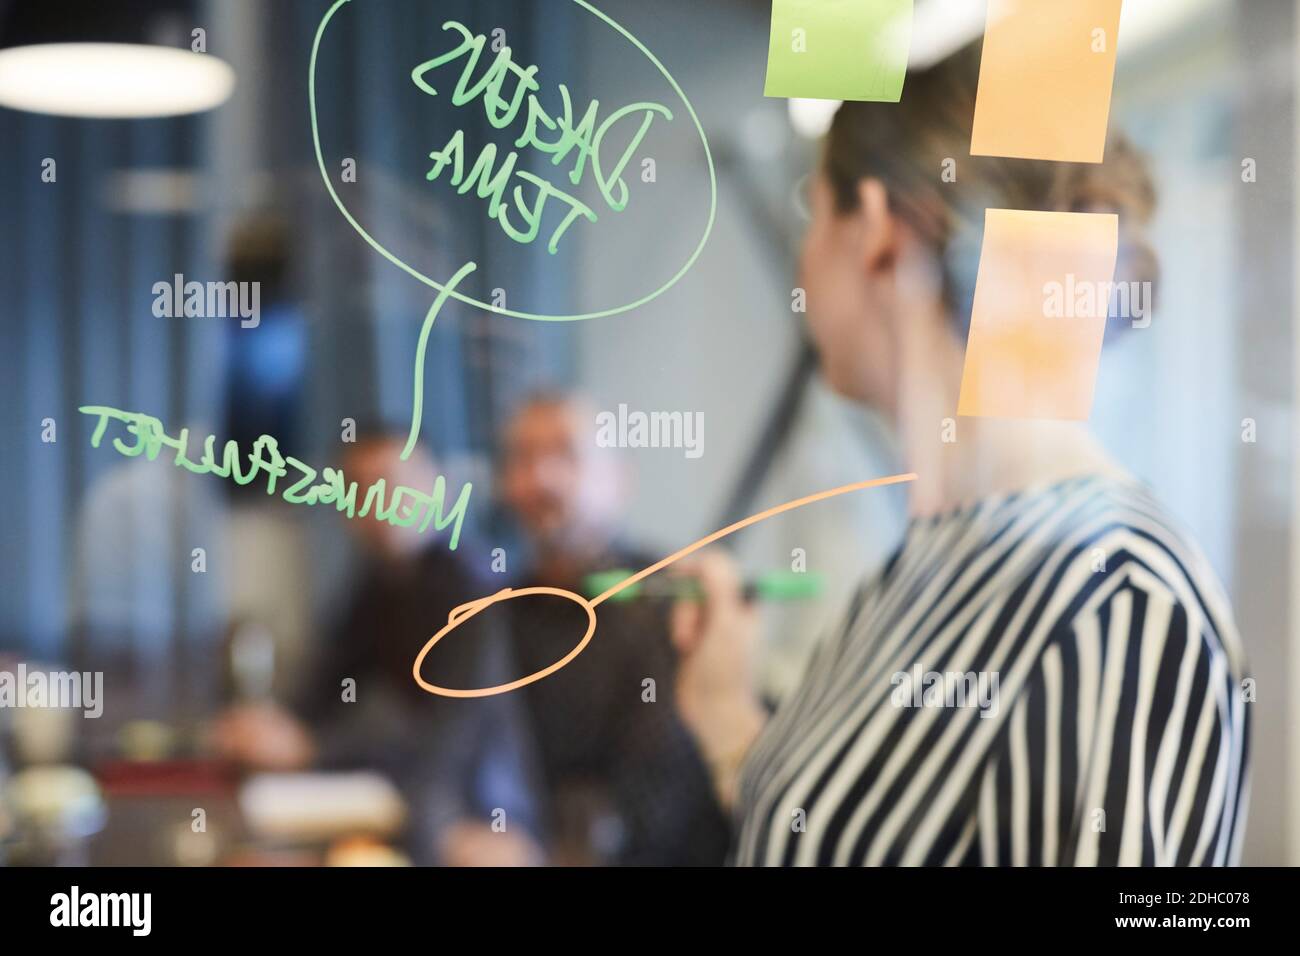 Text and adhesive notes on glass with business people in background at creative office Stock Photo